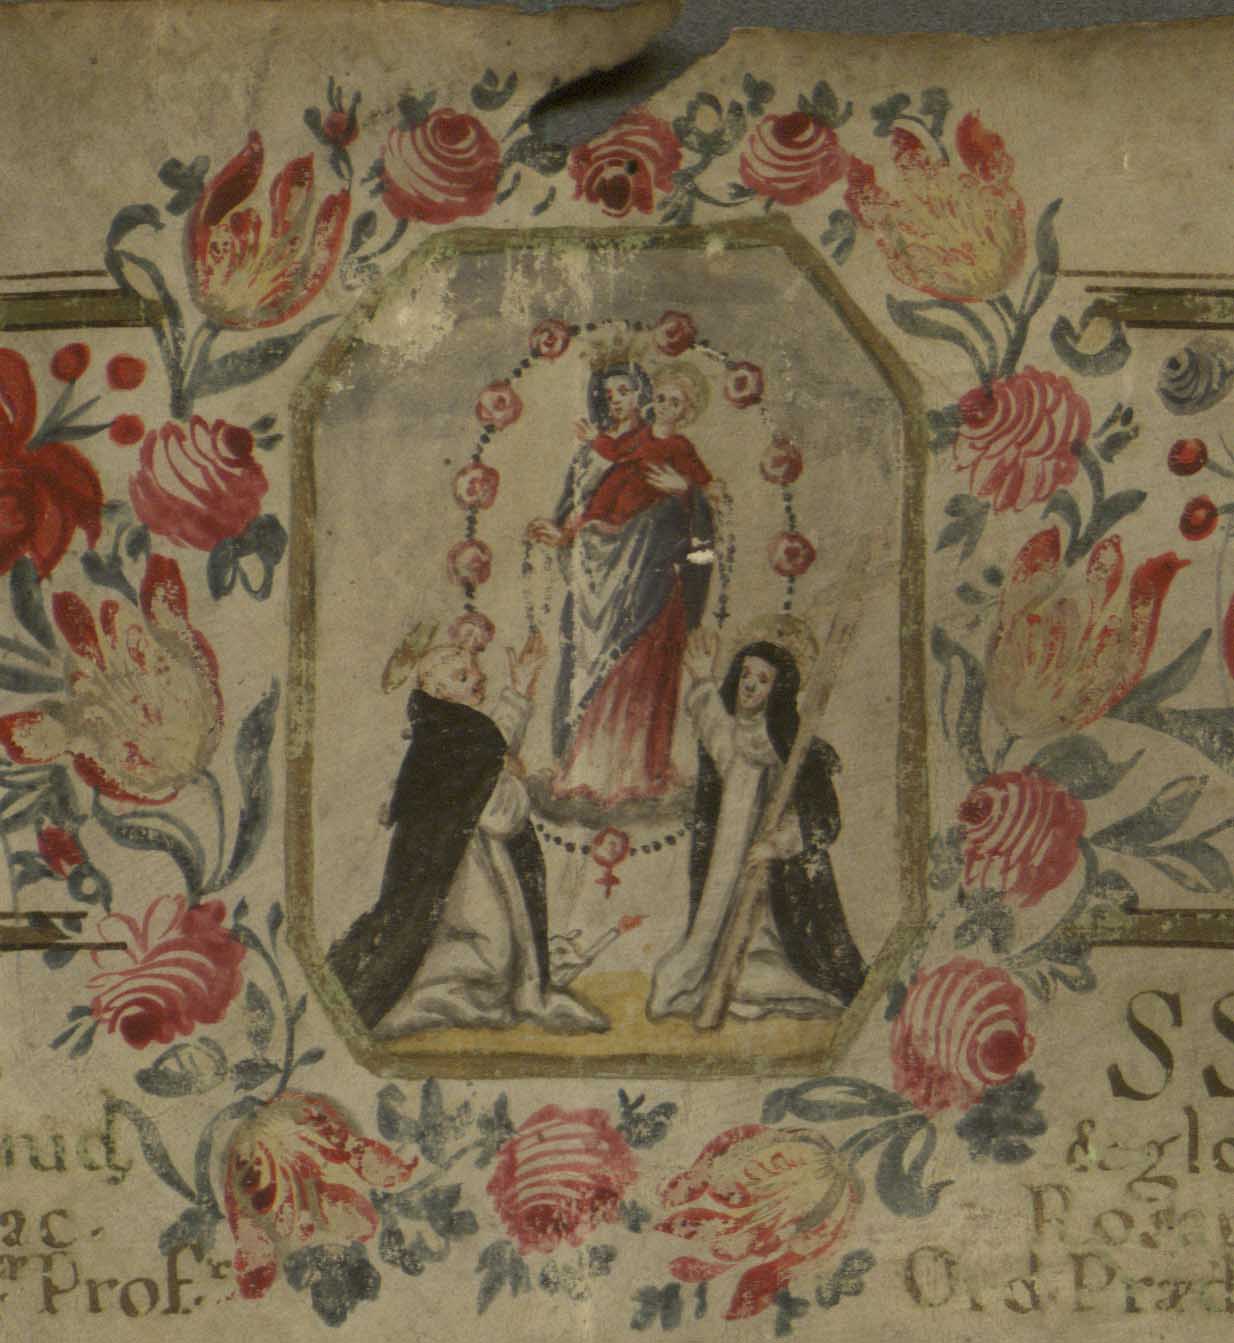 Illustration of Mary holding Jesus whilst two saints kneel (St. Dominic and an unidentified female saint), surrounded by a border of roses